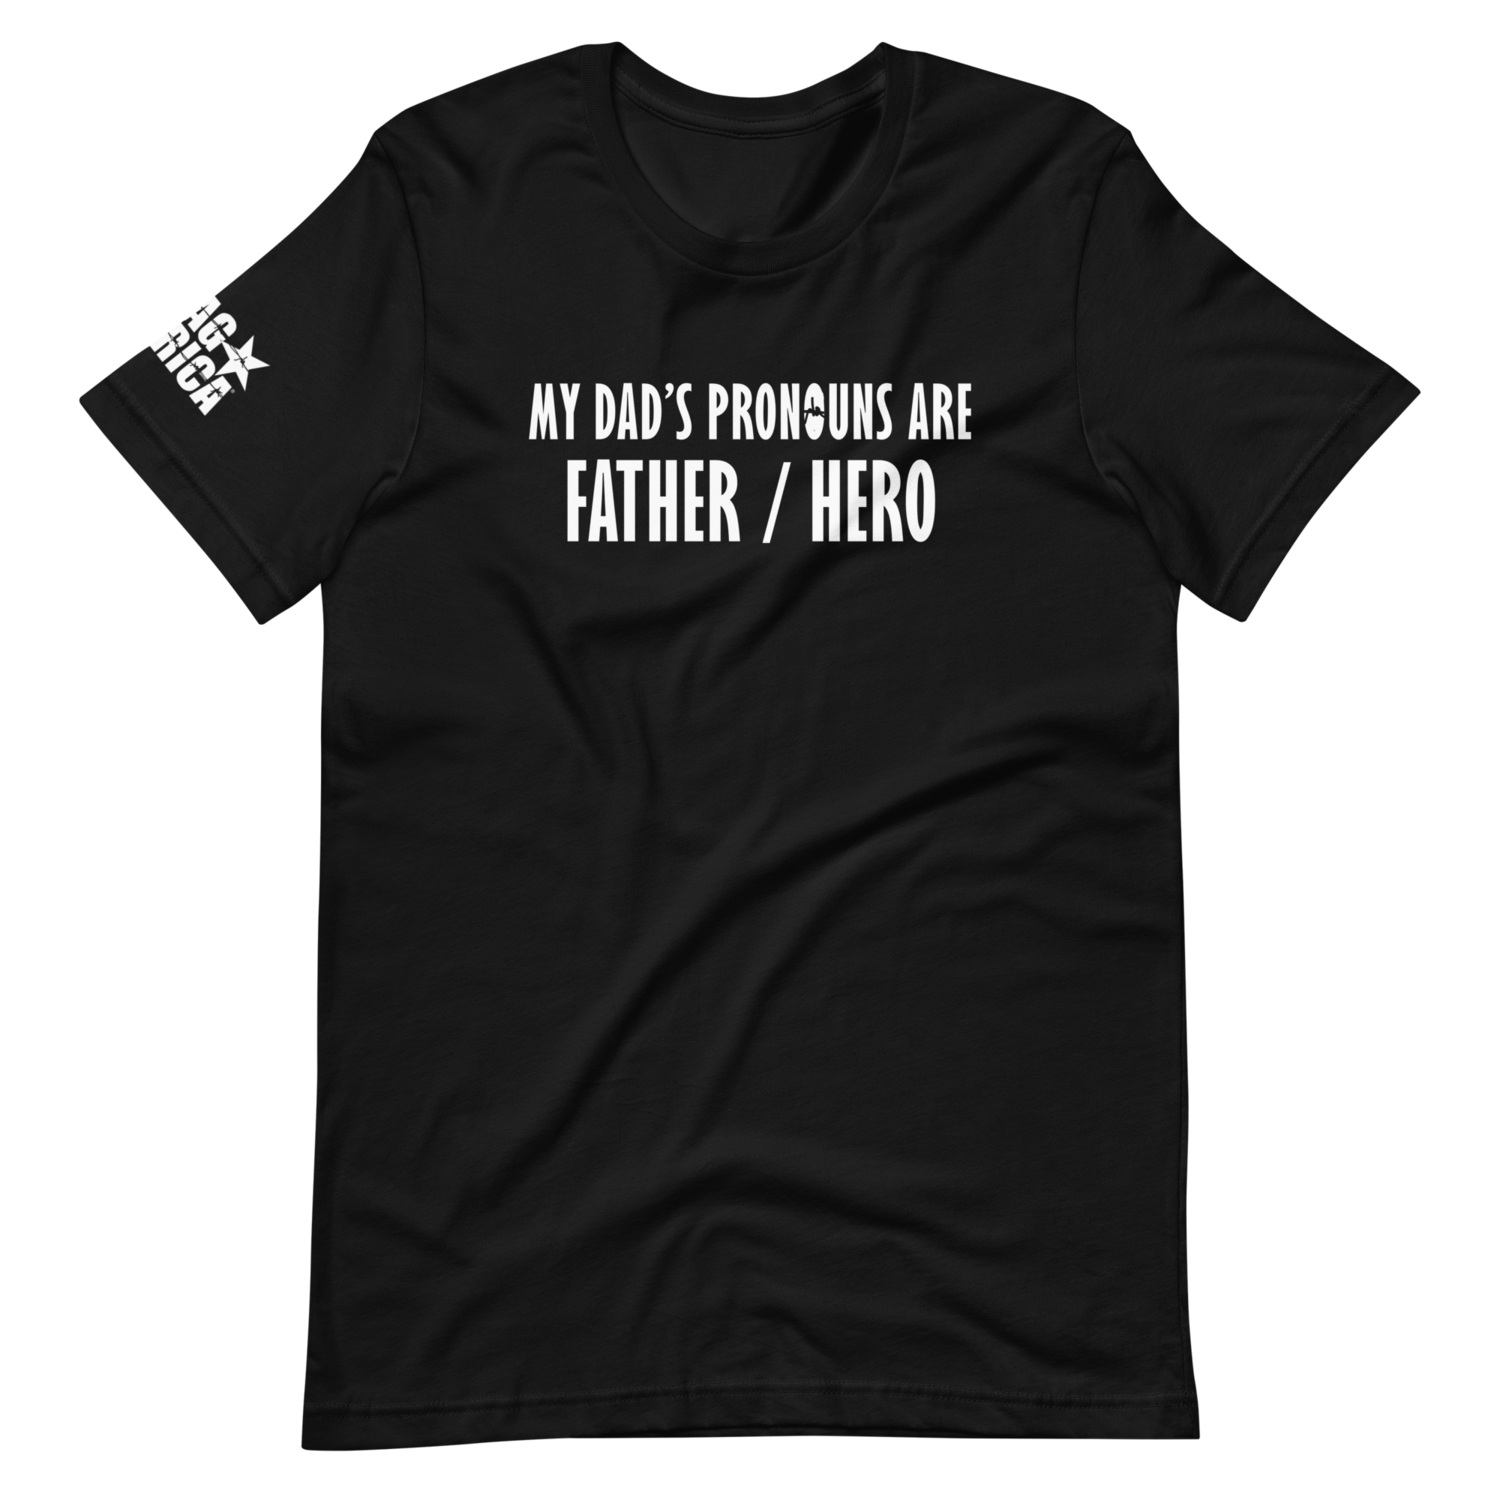 My Dad’s Pronouns are Father / Hero